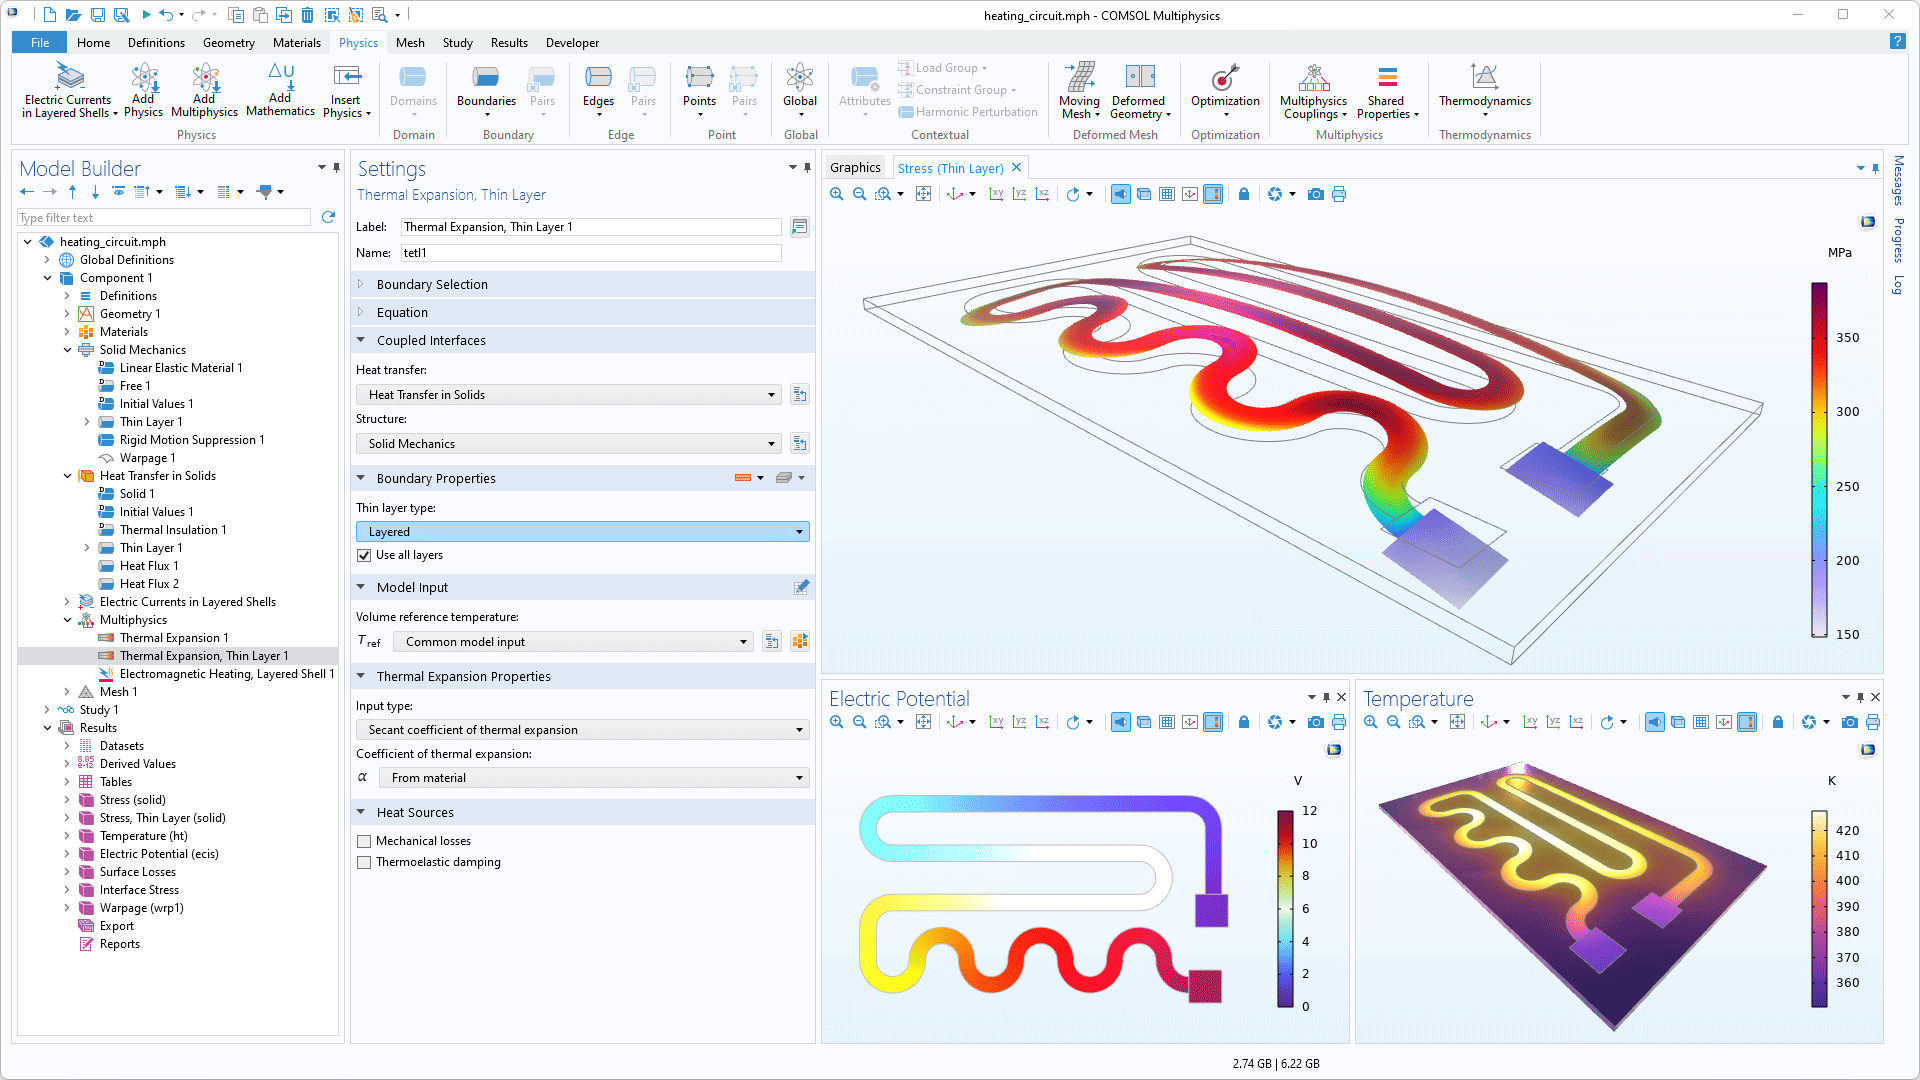 The COMSOL Multiphysics UI showing the Model Builder with the Thermal Expansion, Thin Layer node highlighted; the corresponding Settings window; and three Graphics windows showing a heating circuit model.